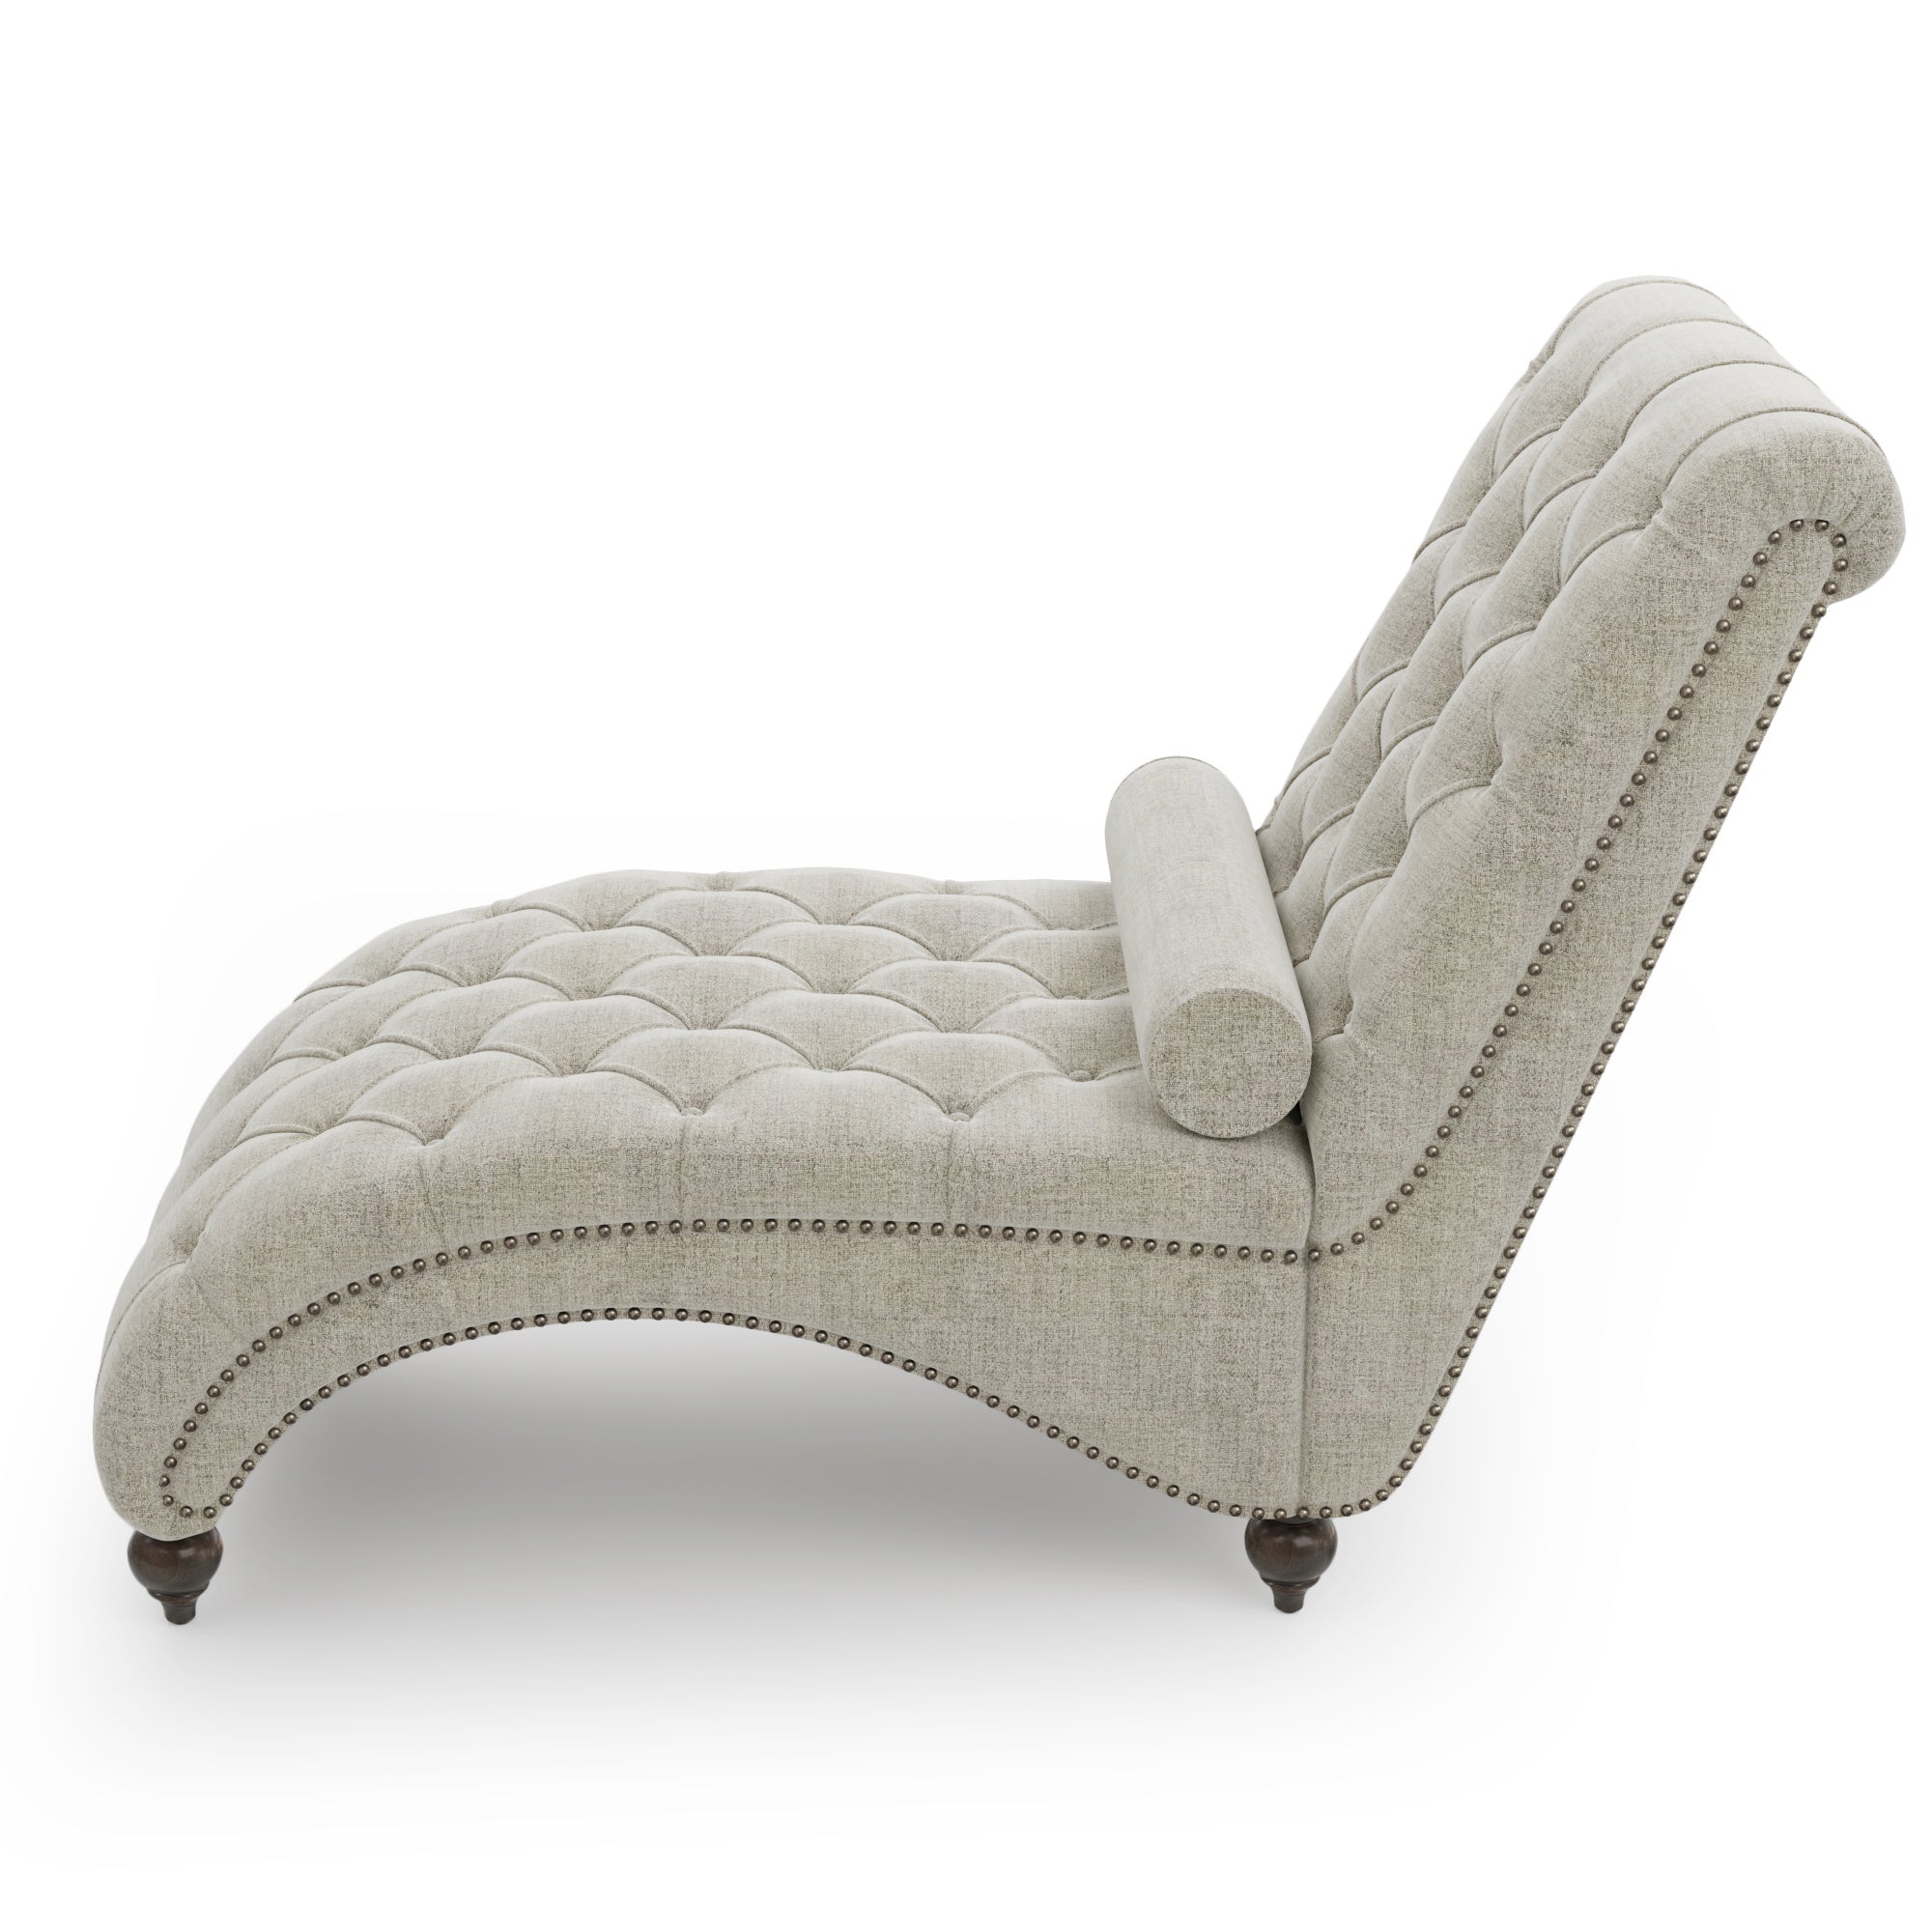 68” Linen Tufted Chaise Lounge